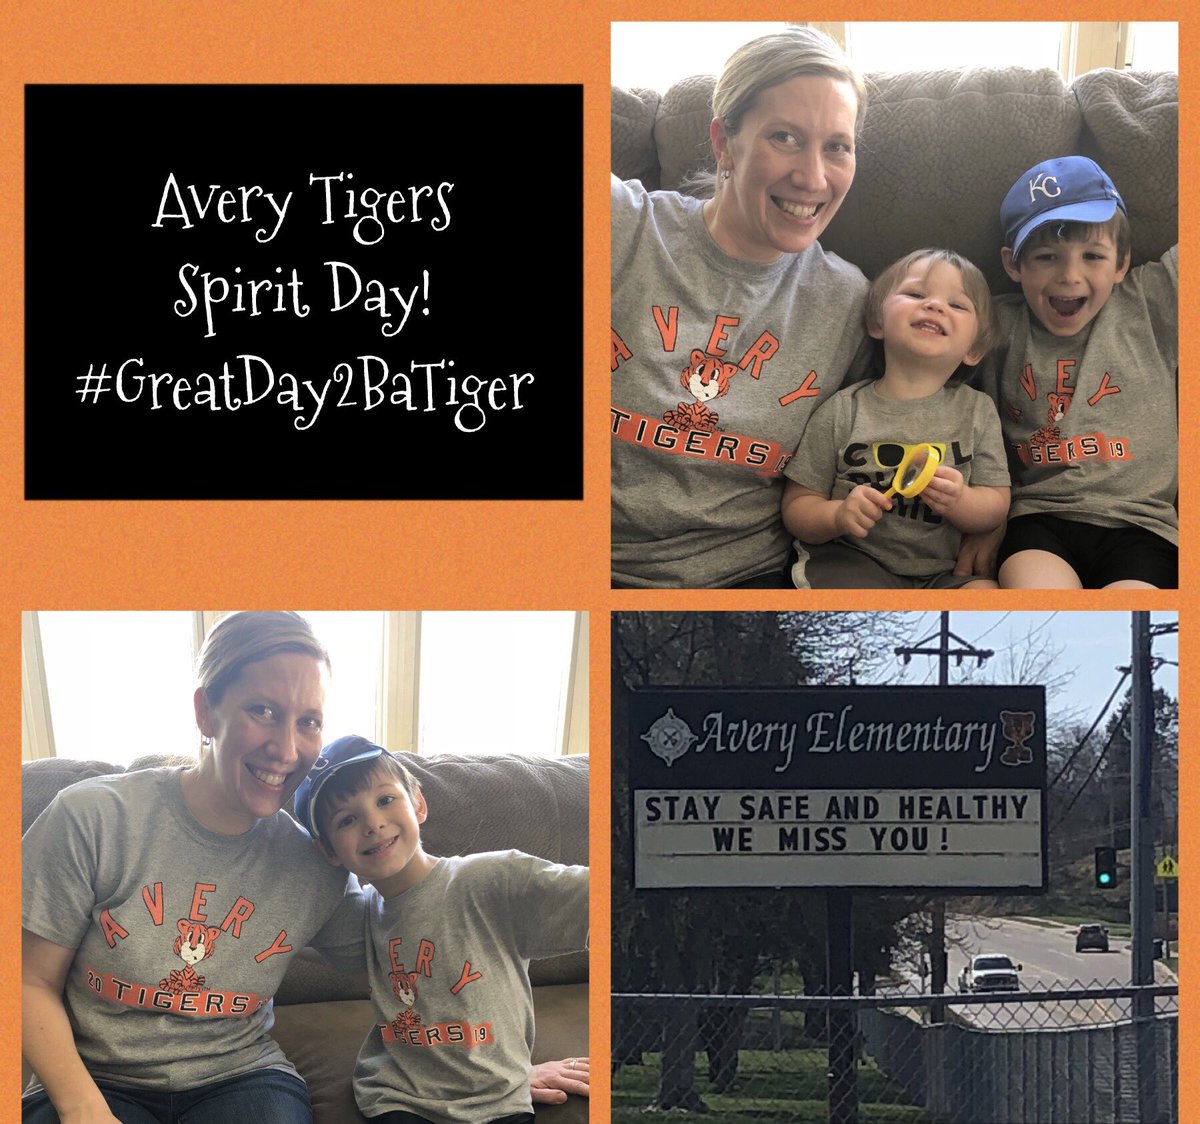 We got spirit, yes we do! Go Tigers! Missing our @Avery_Tigers friends 🐅 #GreatDay2BaTiger